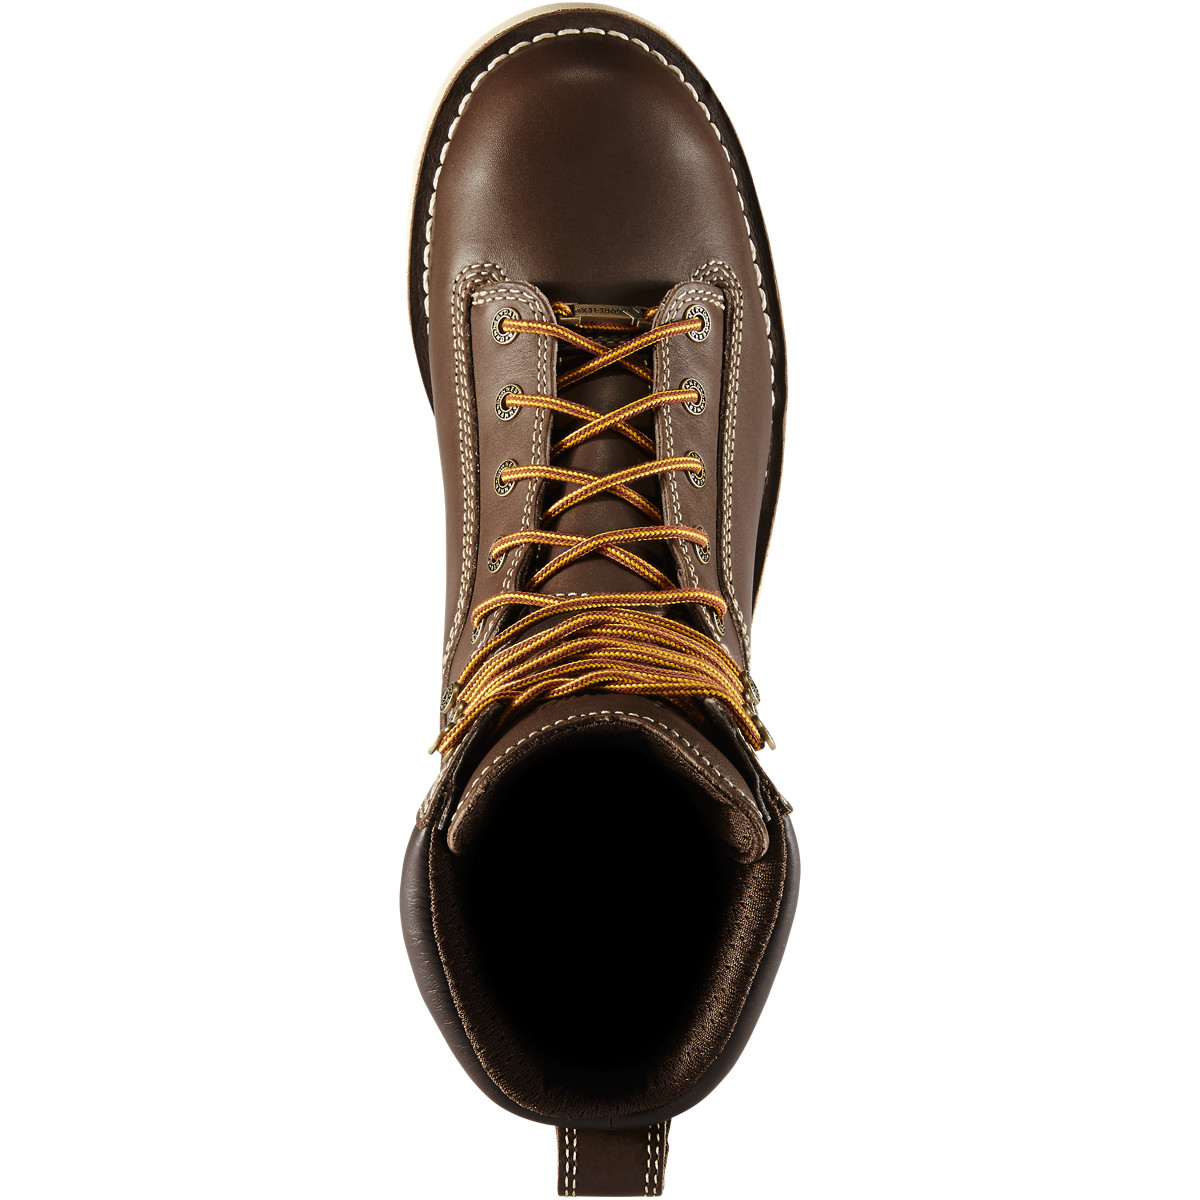 Danner - Quarry USA Brown Alloy Toe Wedge